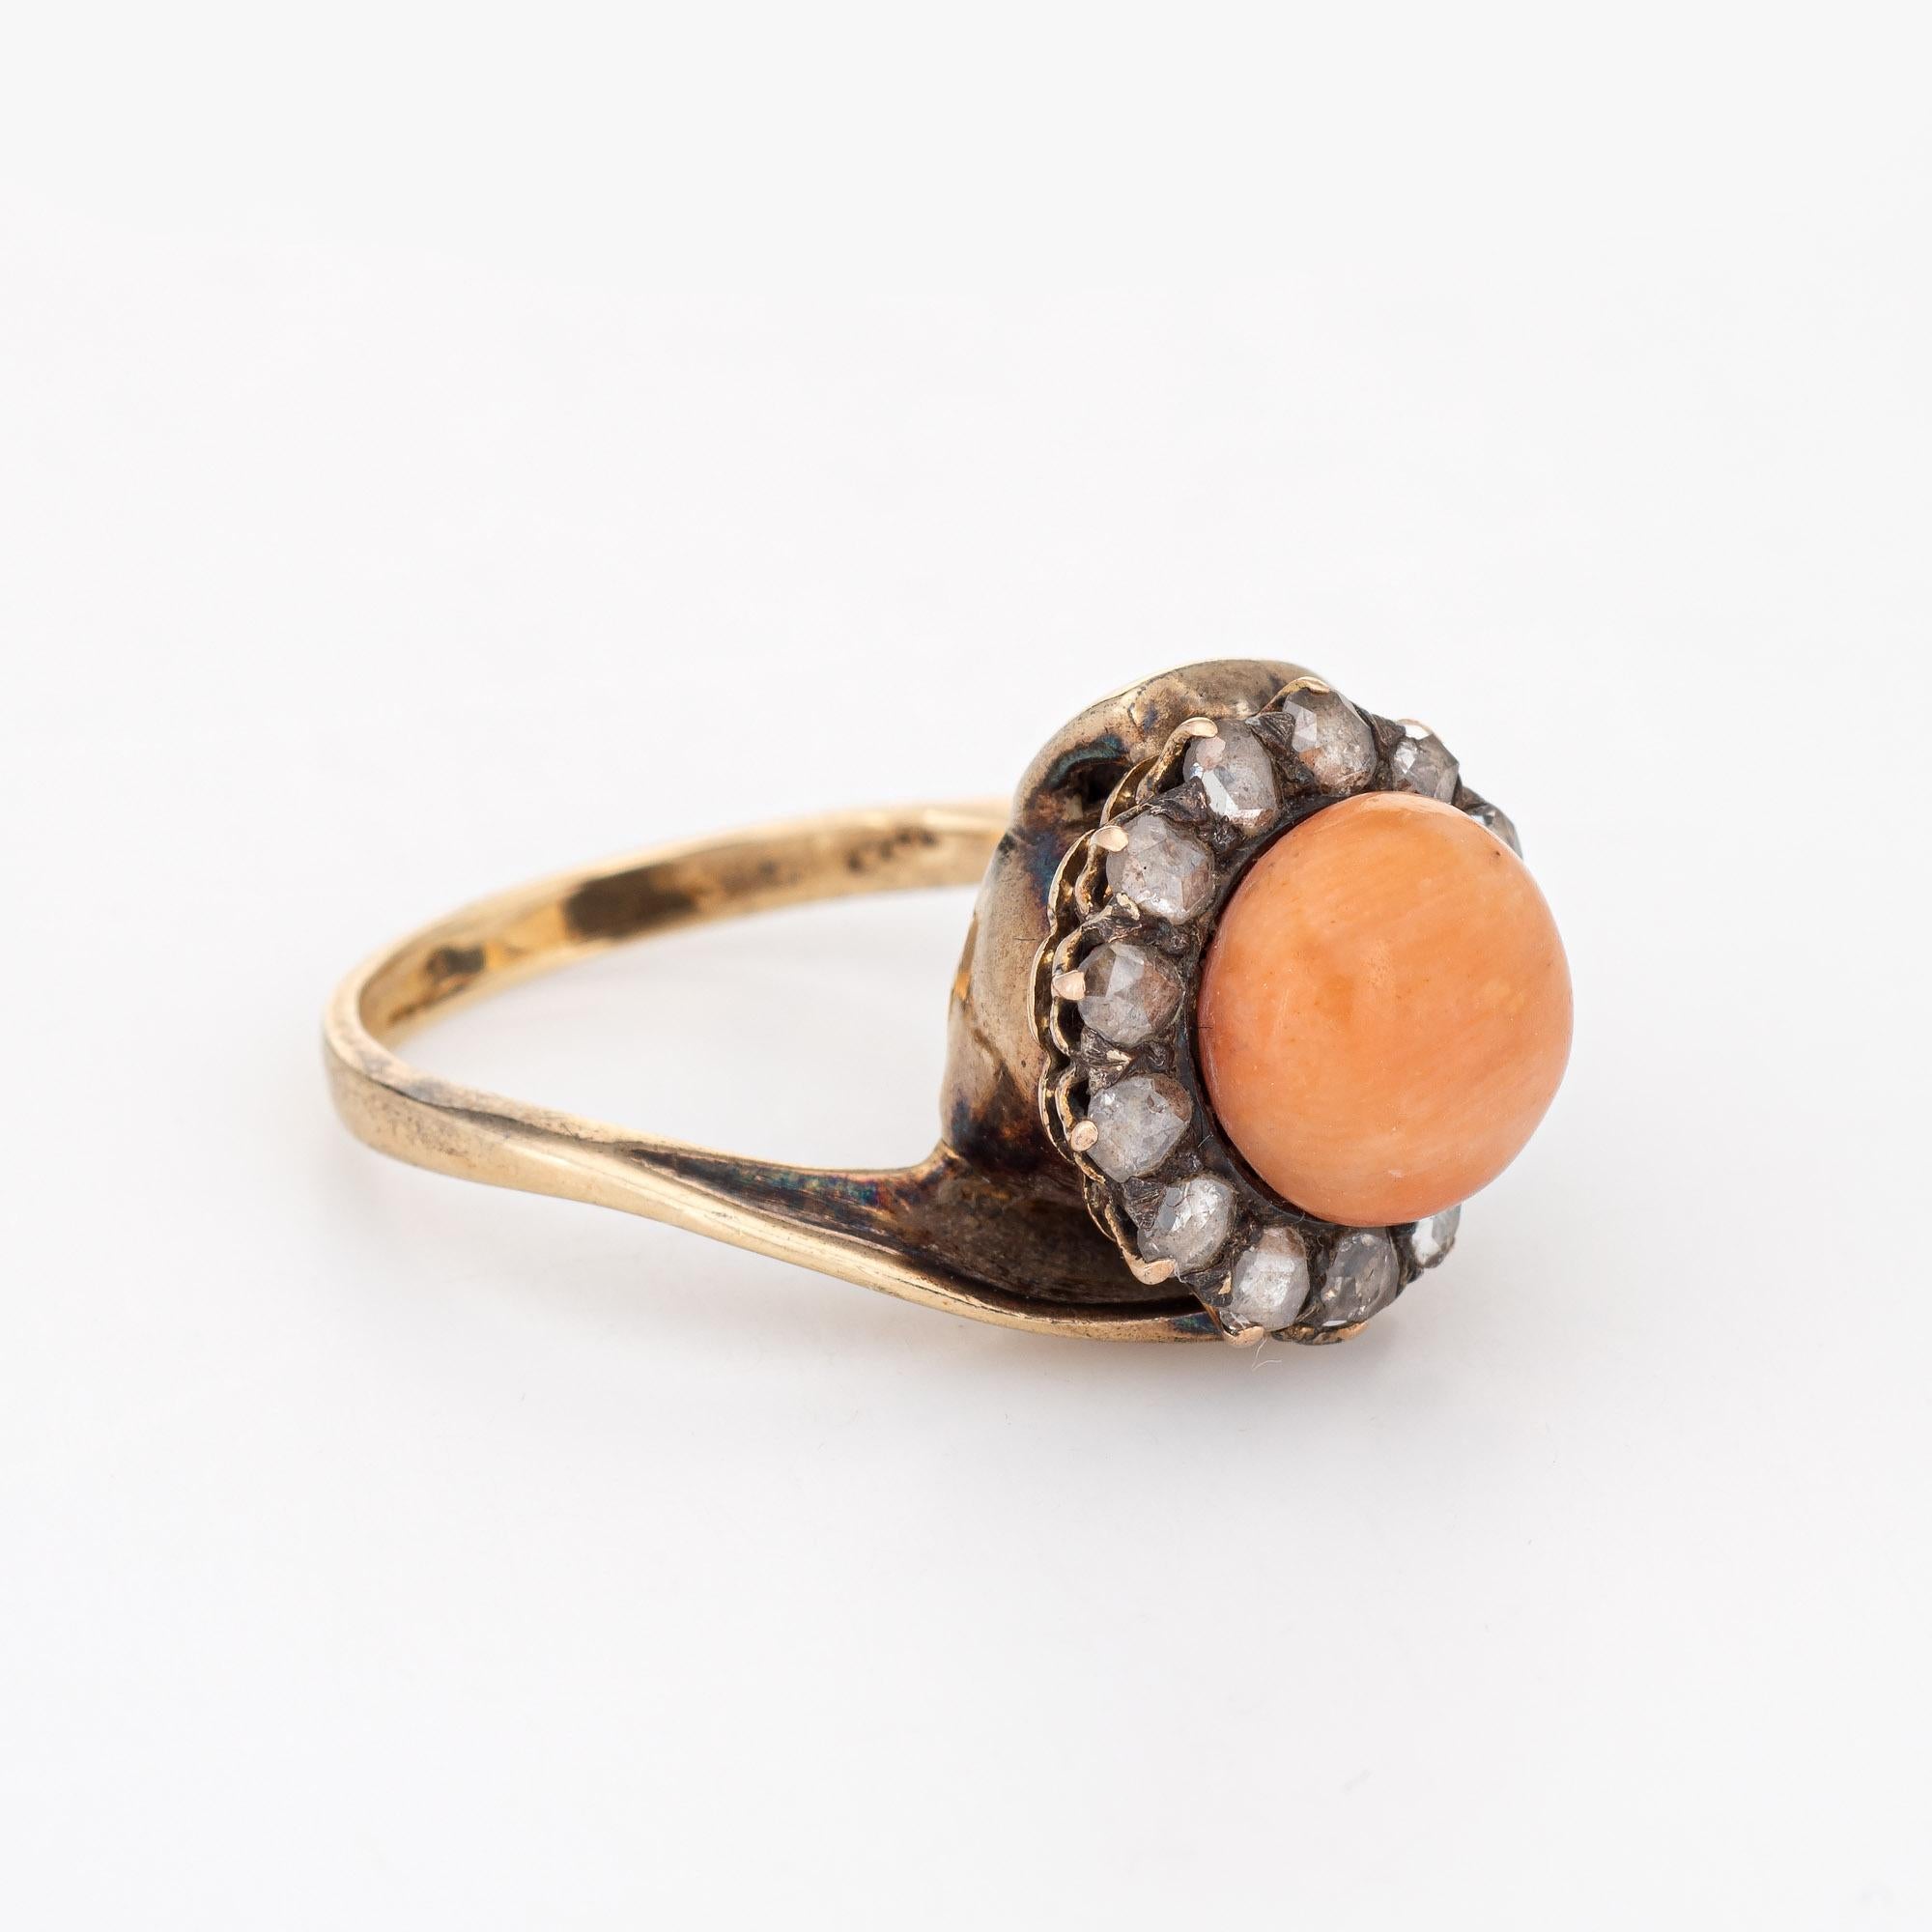 Antique Victorian Ring Coral Rose Cut Diamond 14 Karat Yellow Gold Jewelry In Good Condition For Sale In Torrance, CA